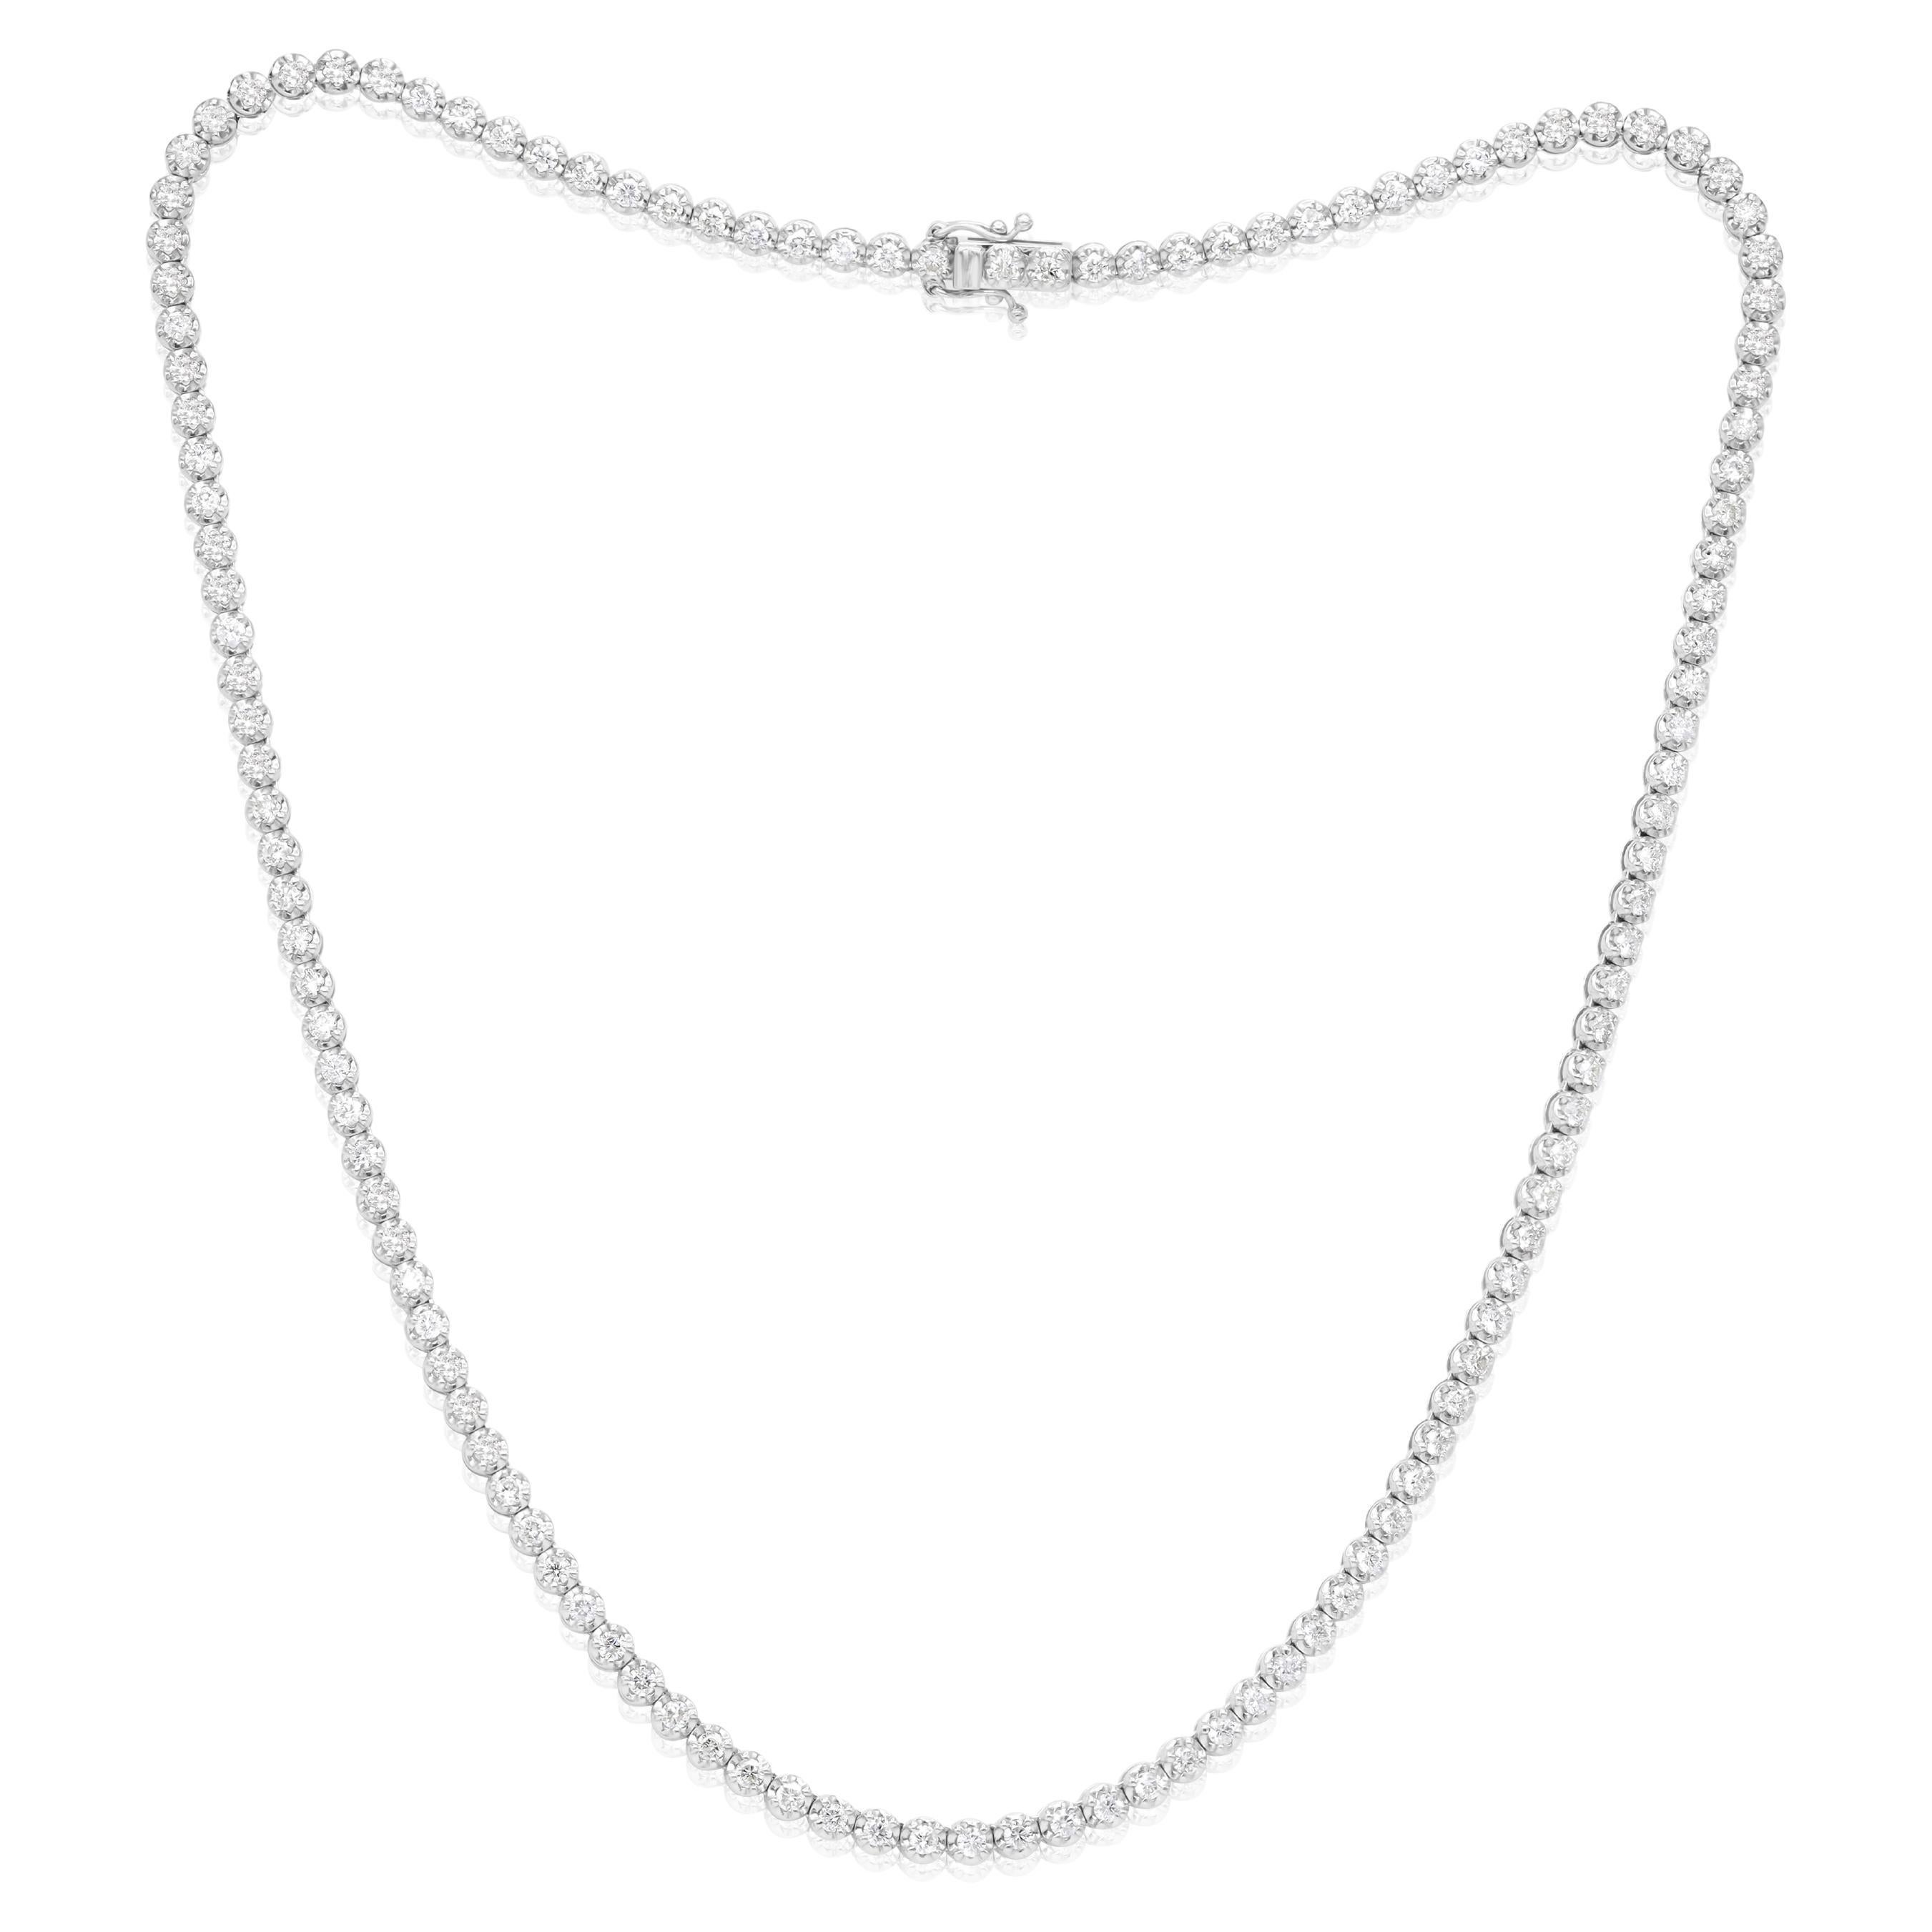 Diana M. Custom 5.00 cts Round Diamond 14k White Gold  Tennis Necklace  For Sale